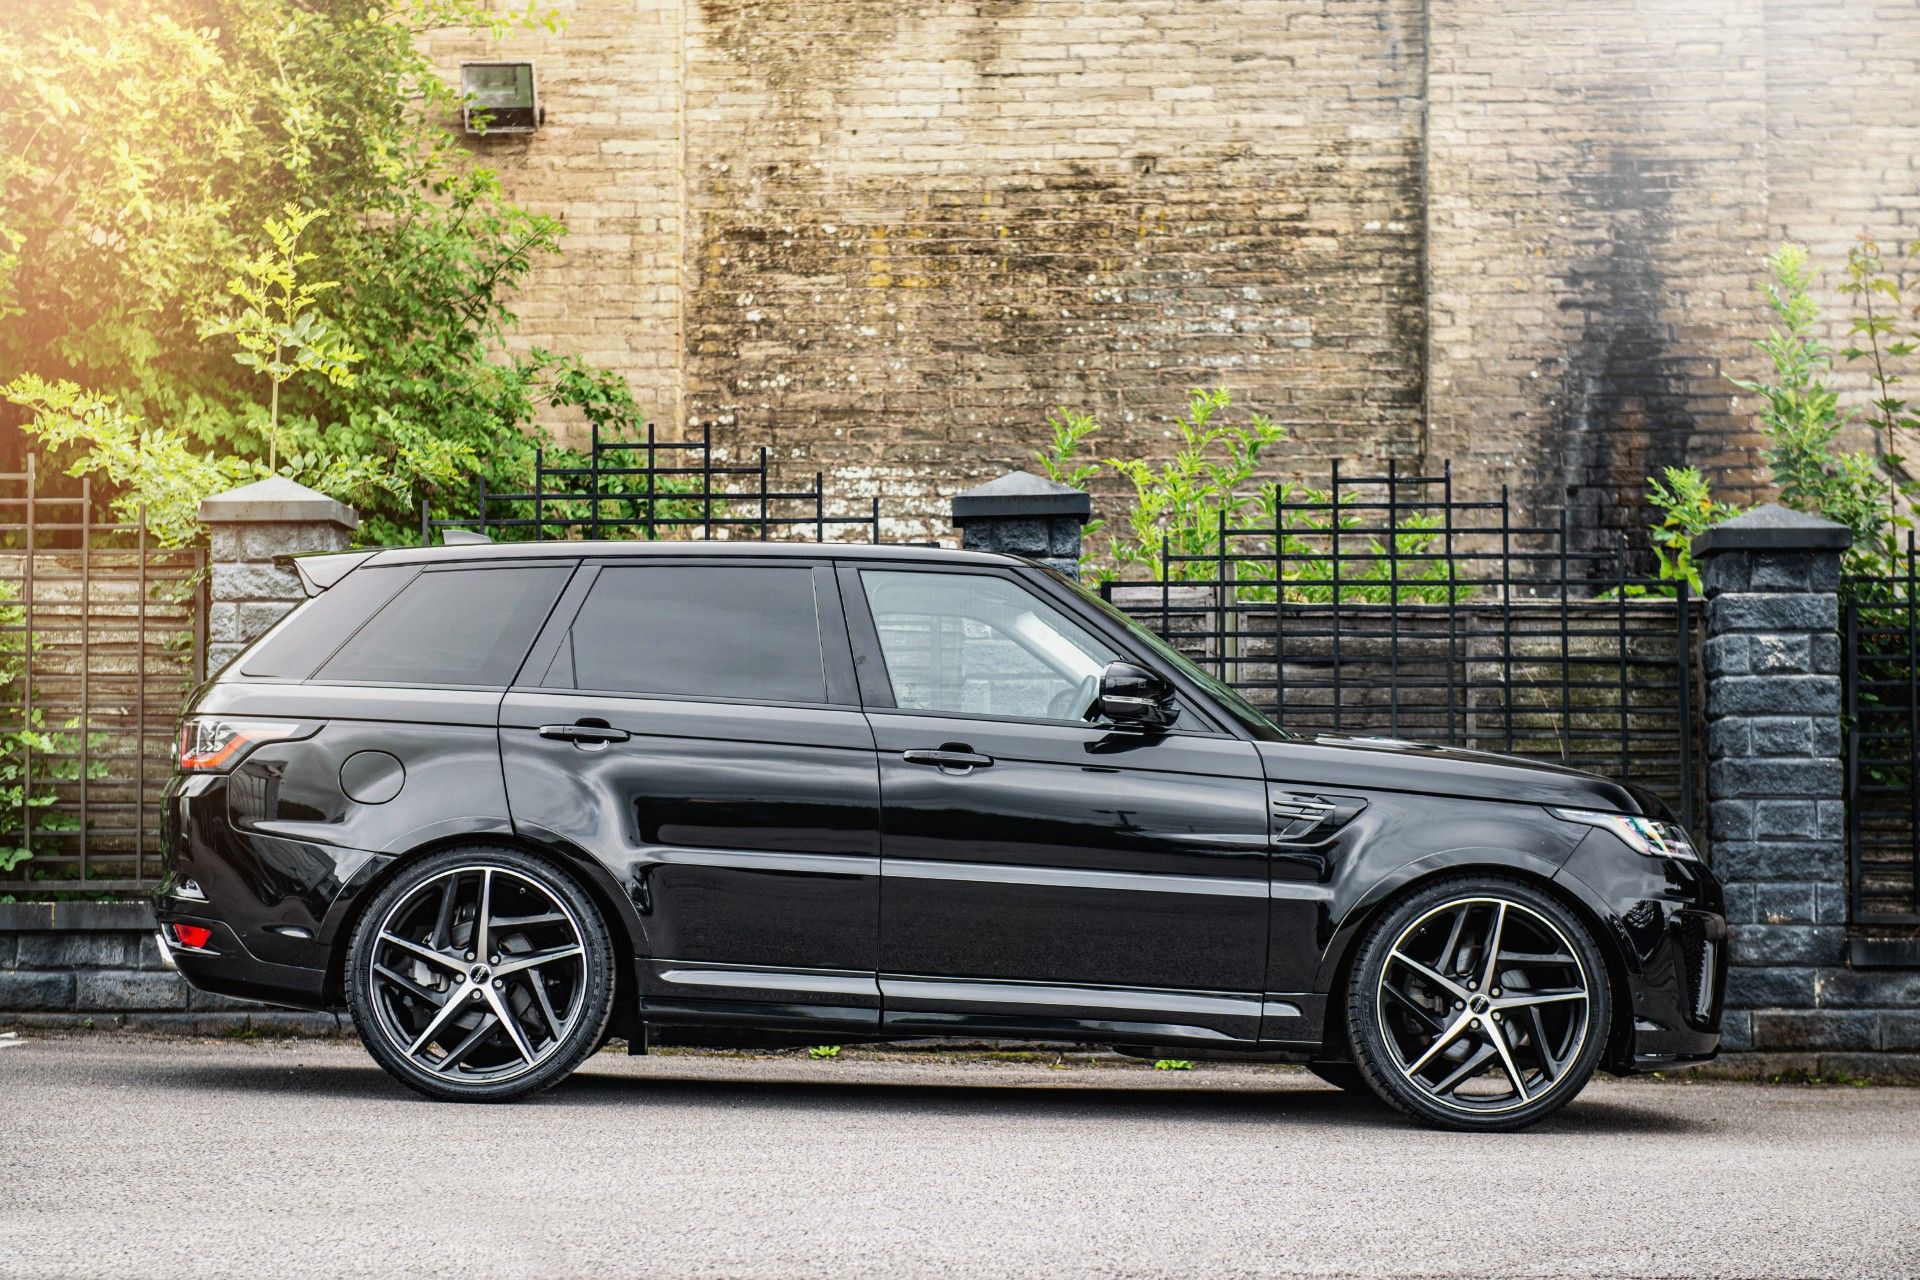 2018 Land Rover Range Rover Sport Autobiography by Kahn Automobiles